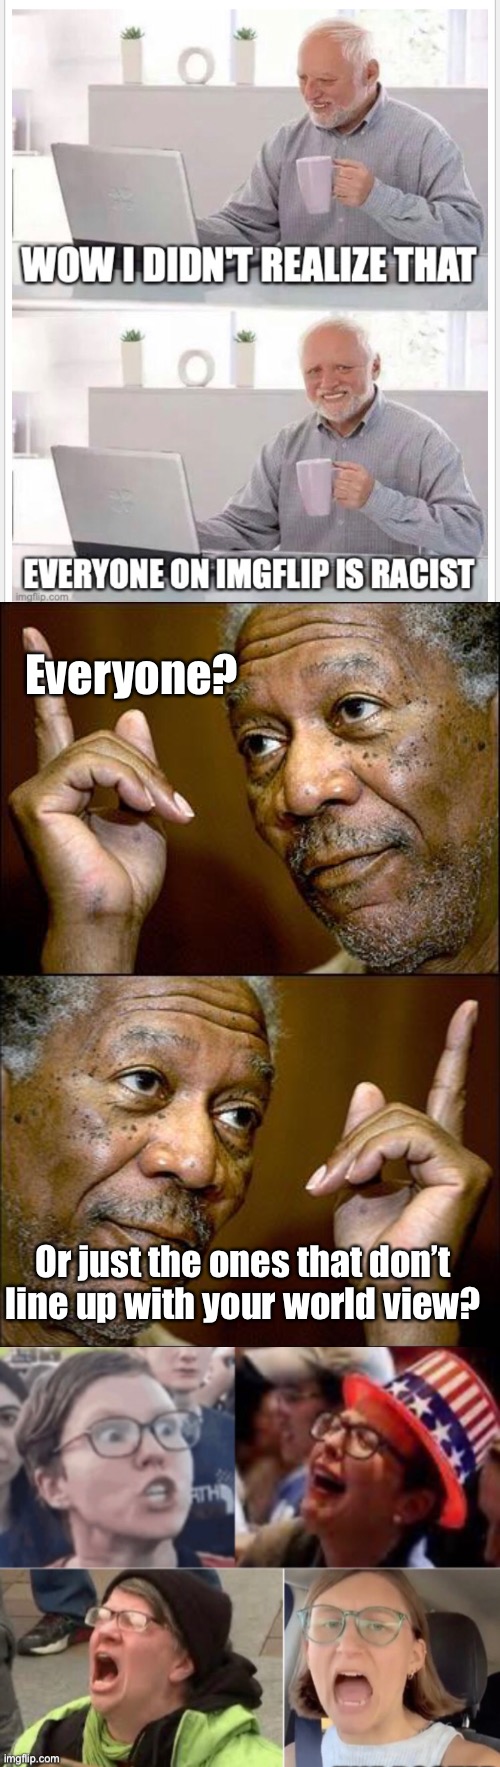 Bunch of meanies | Everyone? Or just the ones that don’t line up with your world view? | image tagged in this morgan freeman,funny memes,politics lol | made w/ Imgflip meme maker